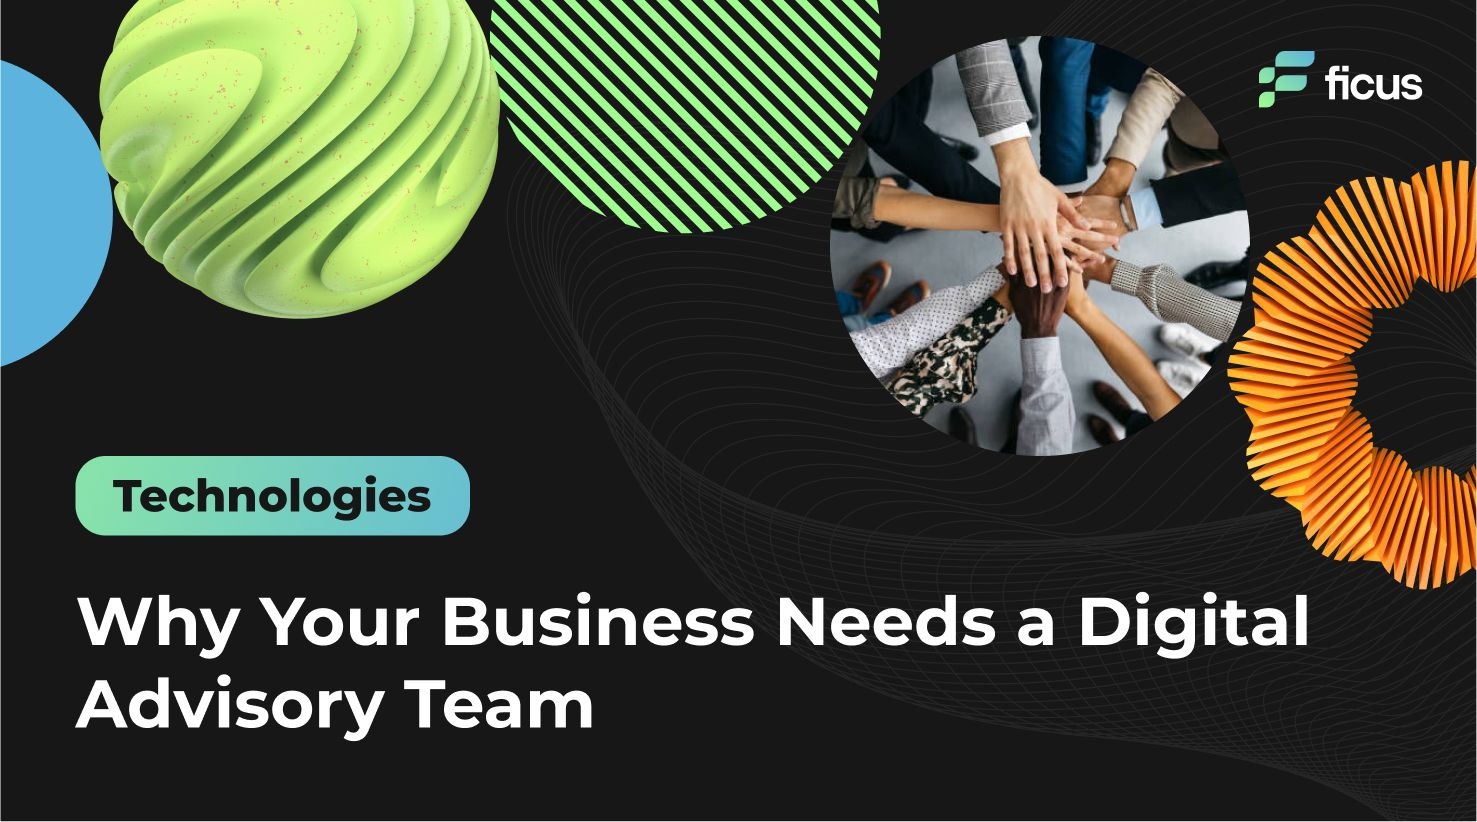 Why a Digital Advisory Team Is Necessary for Your Business?